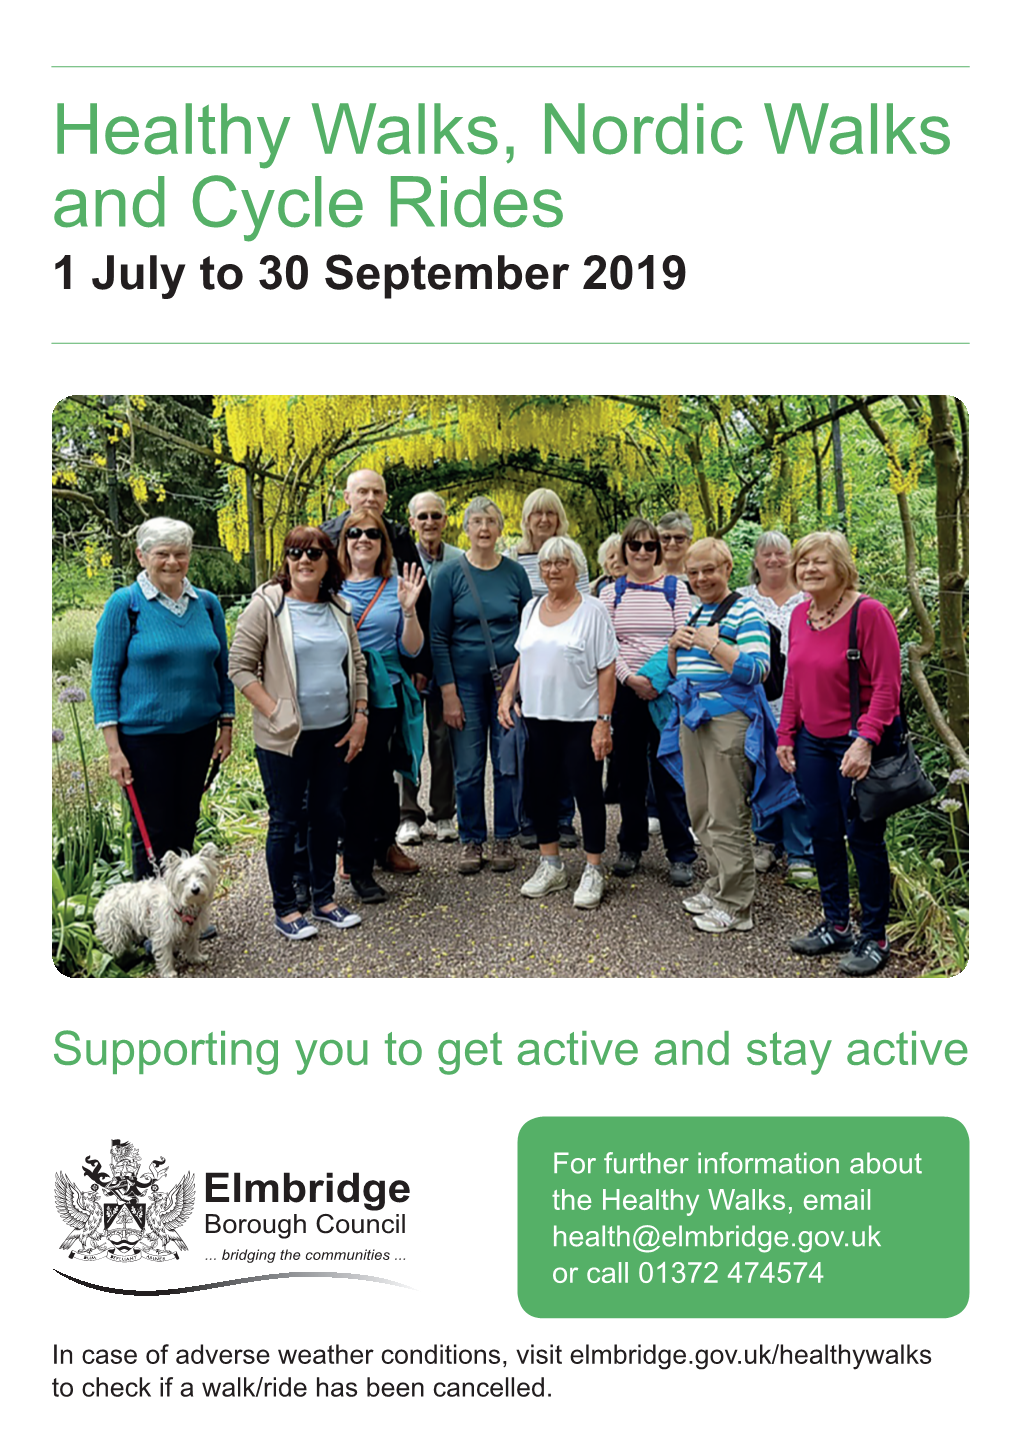 Healthy Walks, Nordic Walks and Cycle Rides 1 July to 30 September 2019